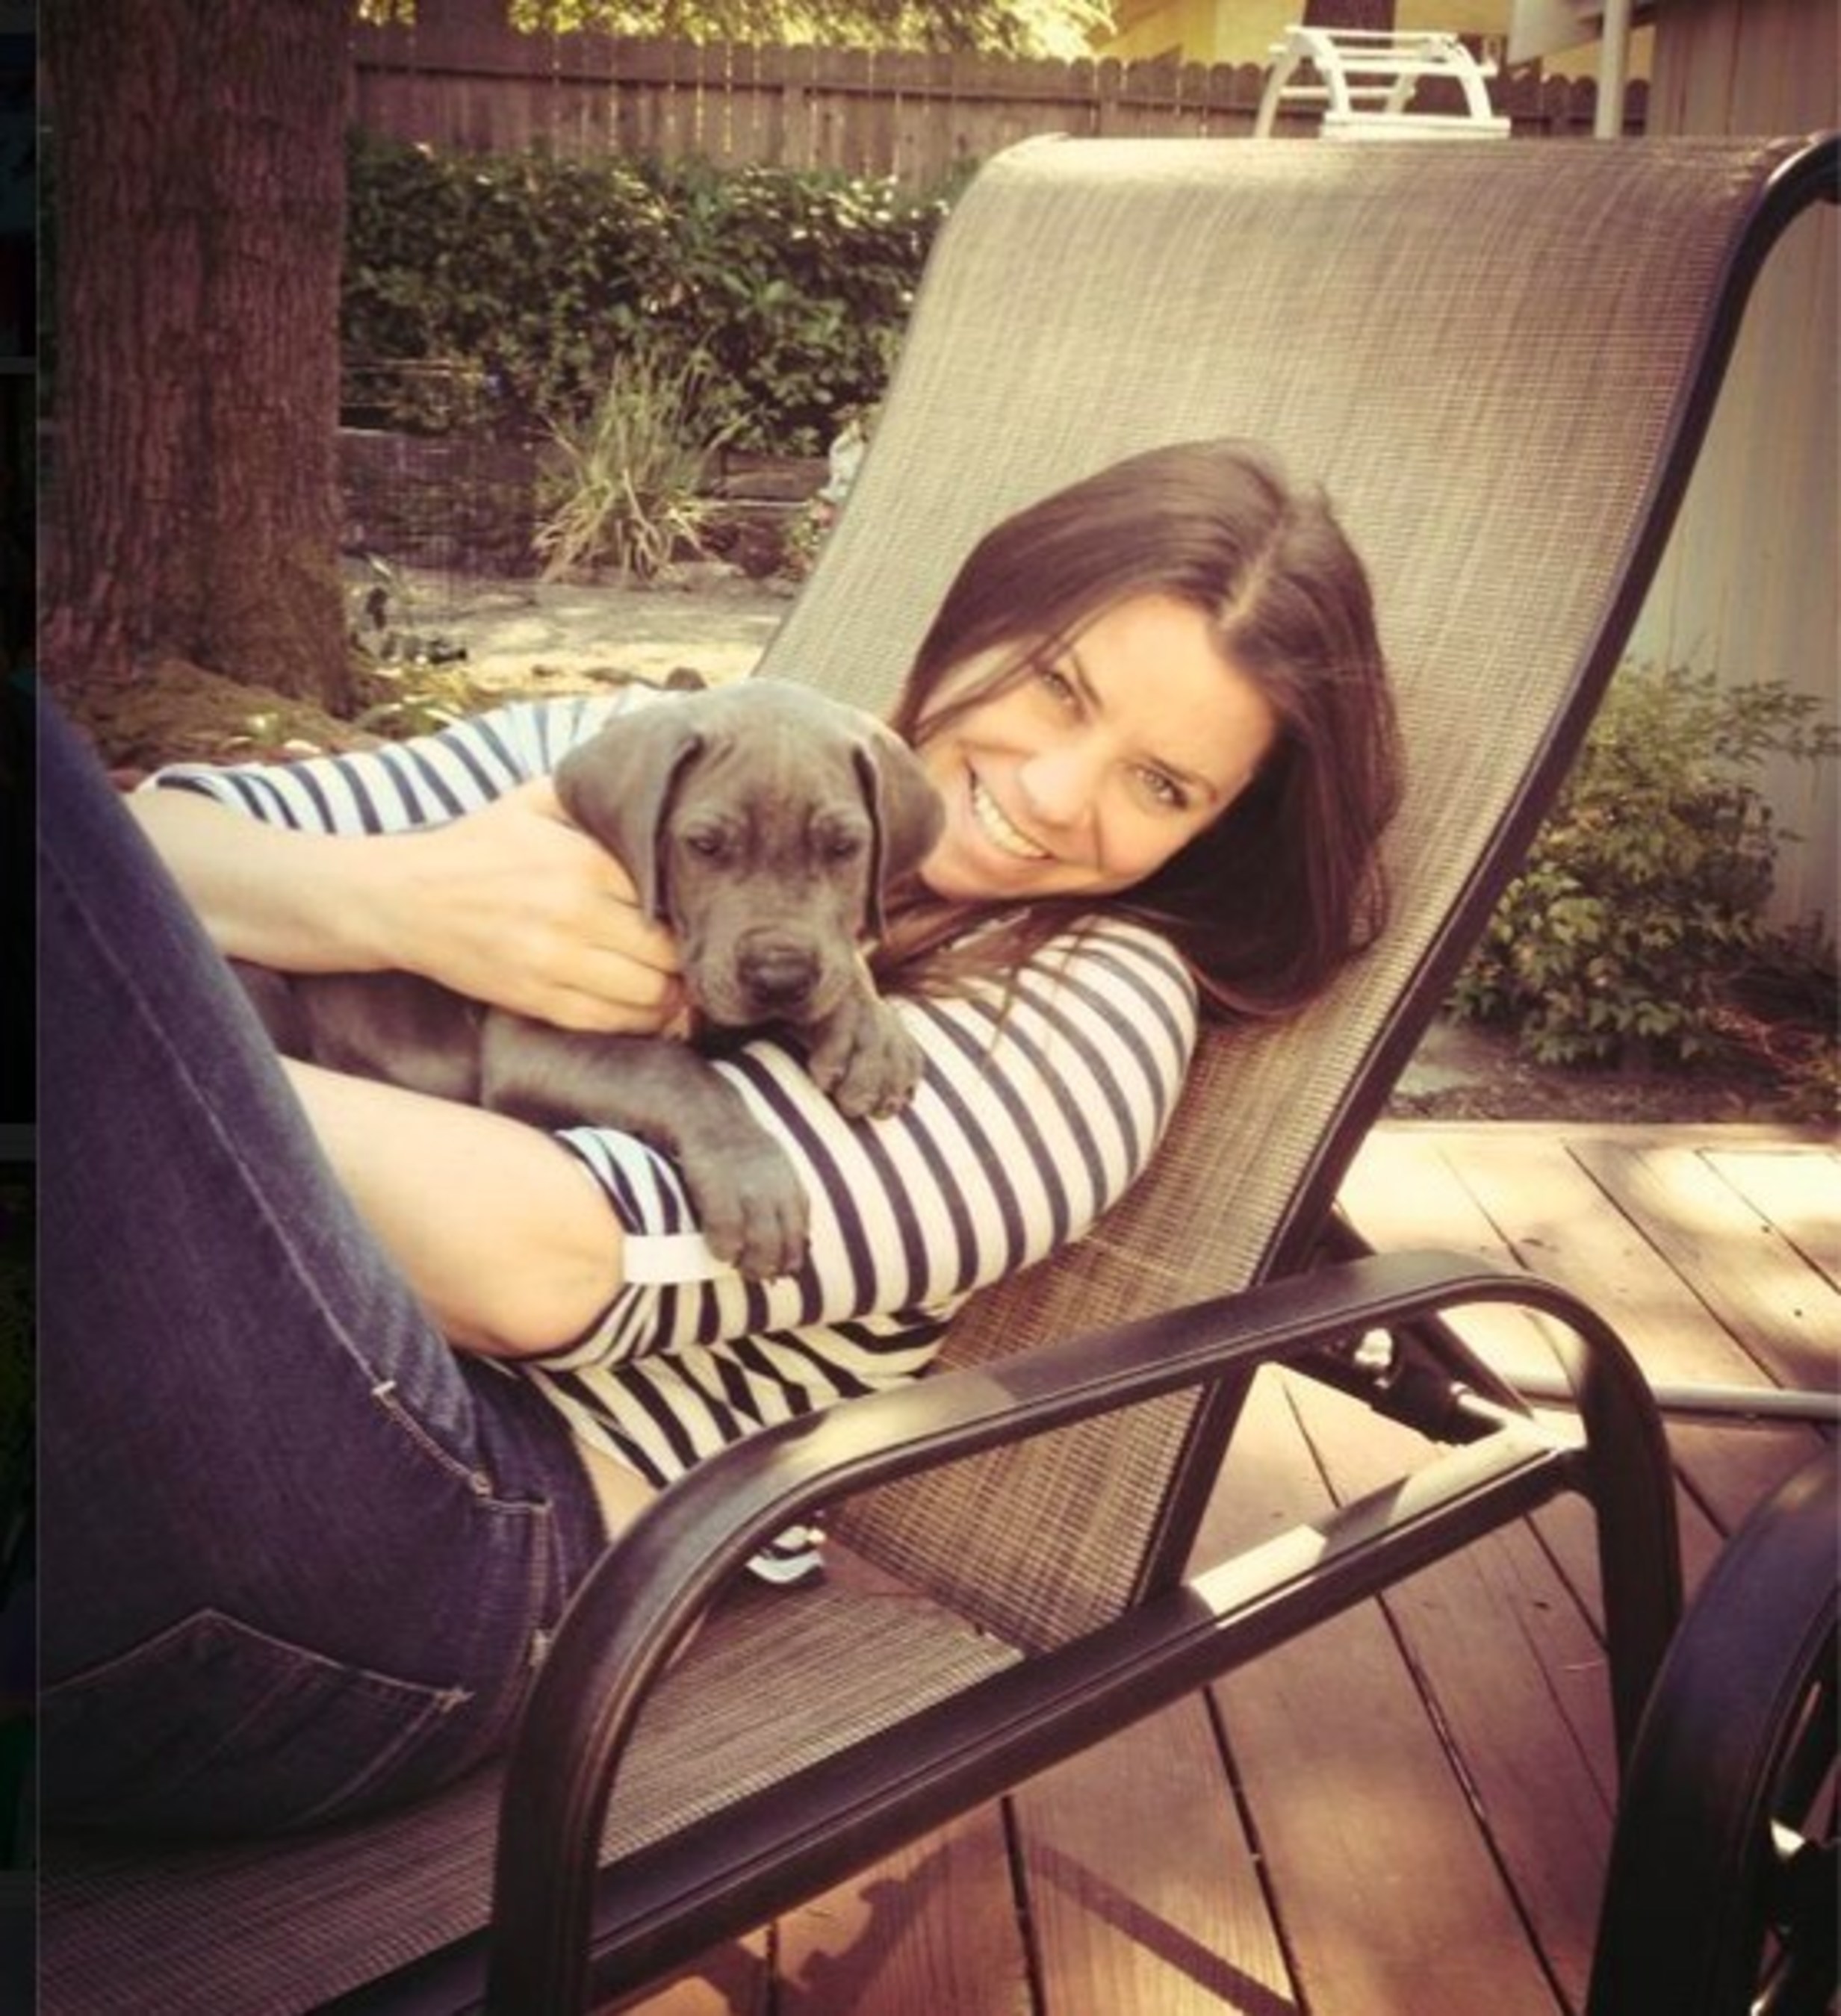 Death-with-dignity advocate Brittany Maynard